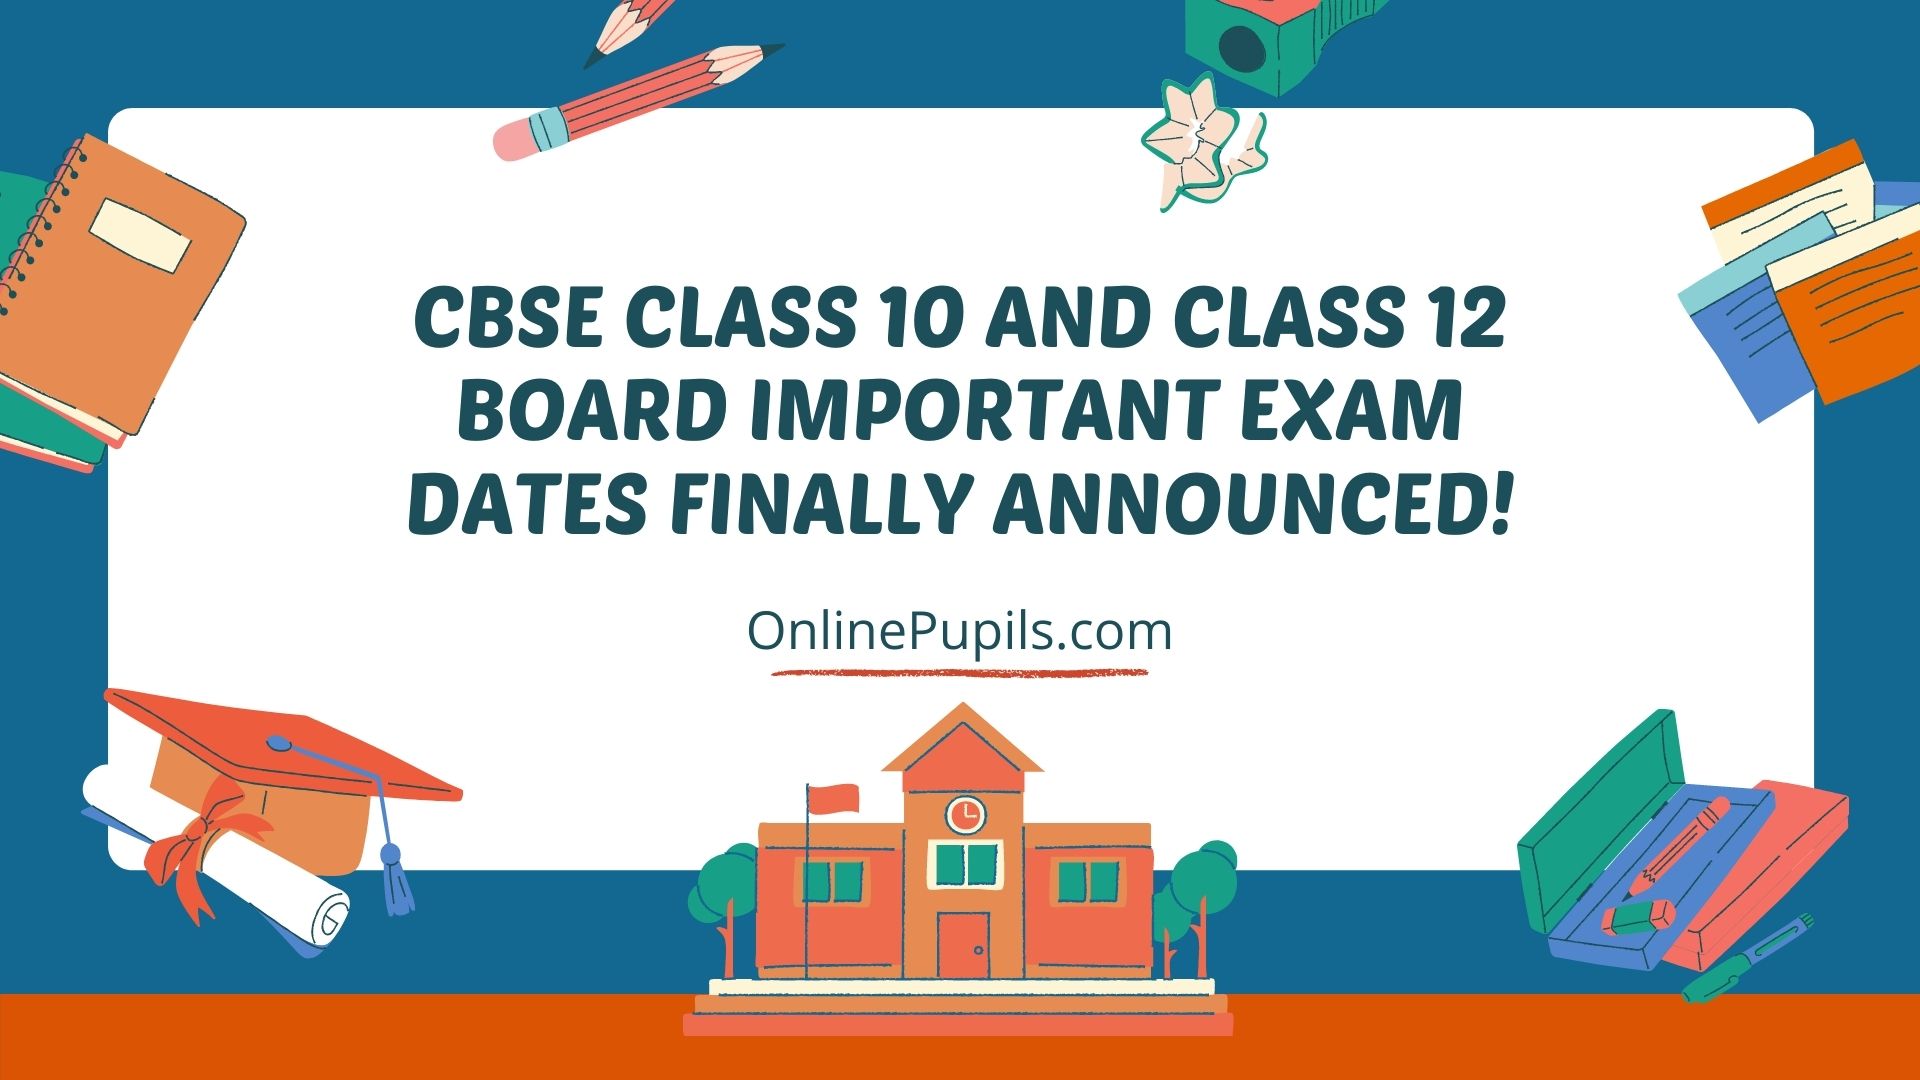 CBSE CLASS 10 AND CLASS 12 BOARD IMPORTANT EXAM DATES FINALLY ANNOUNCED!